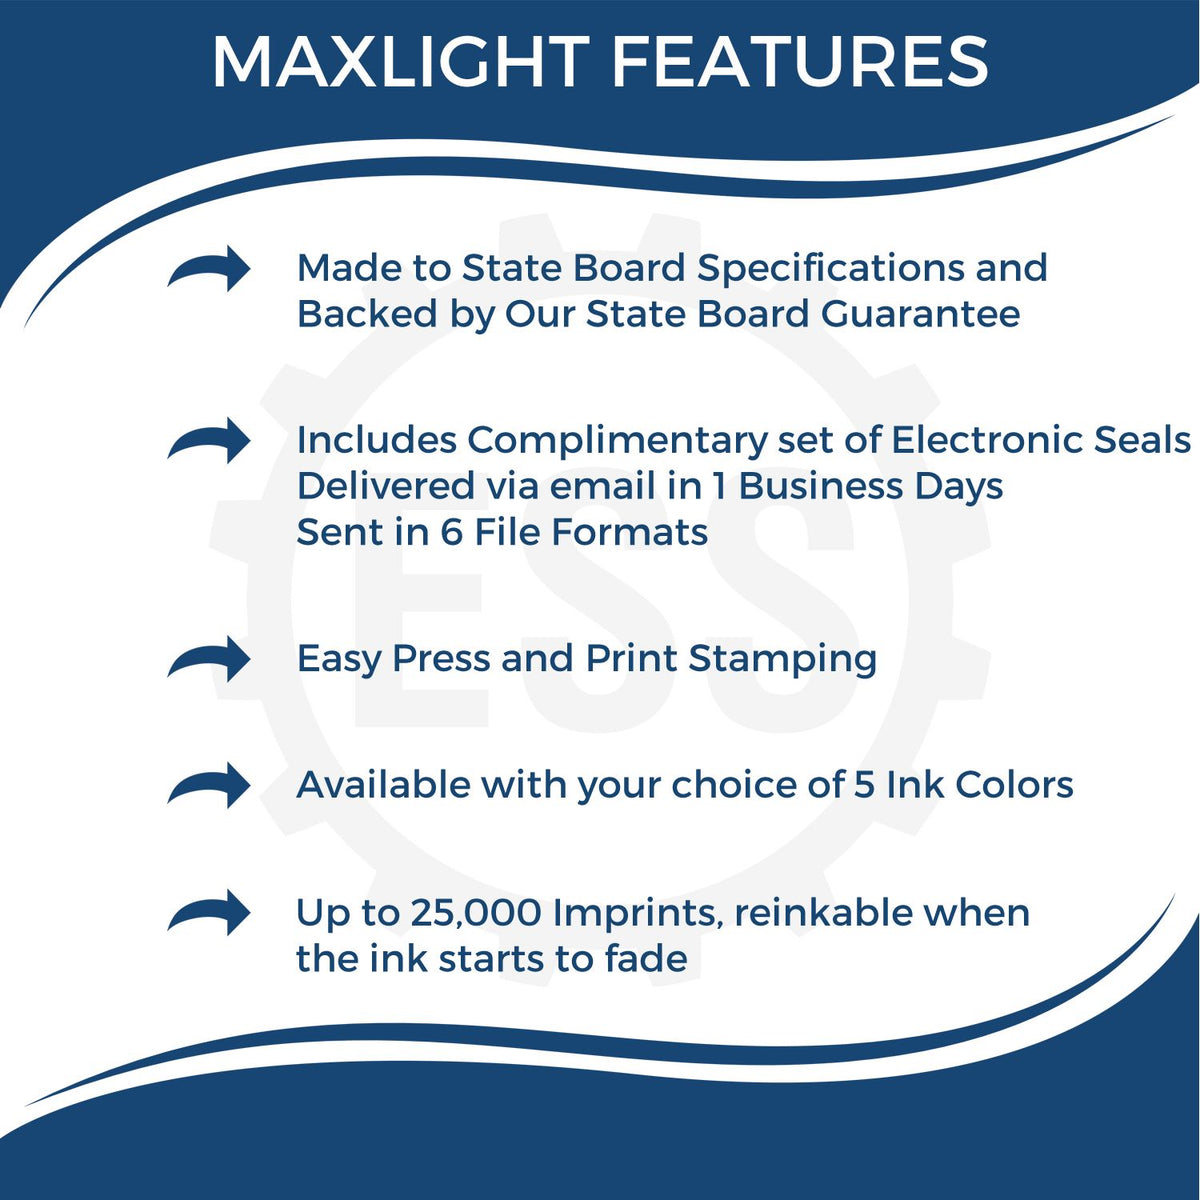 A picture of an infographic highlighting the selling points for the MaxLight Premium Pre-Inked Indiana Rectangular Notarial Stamp